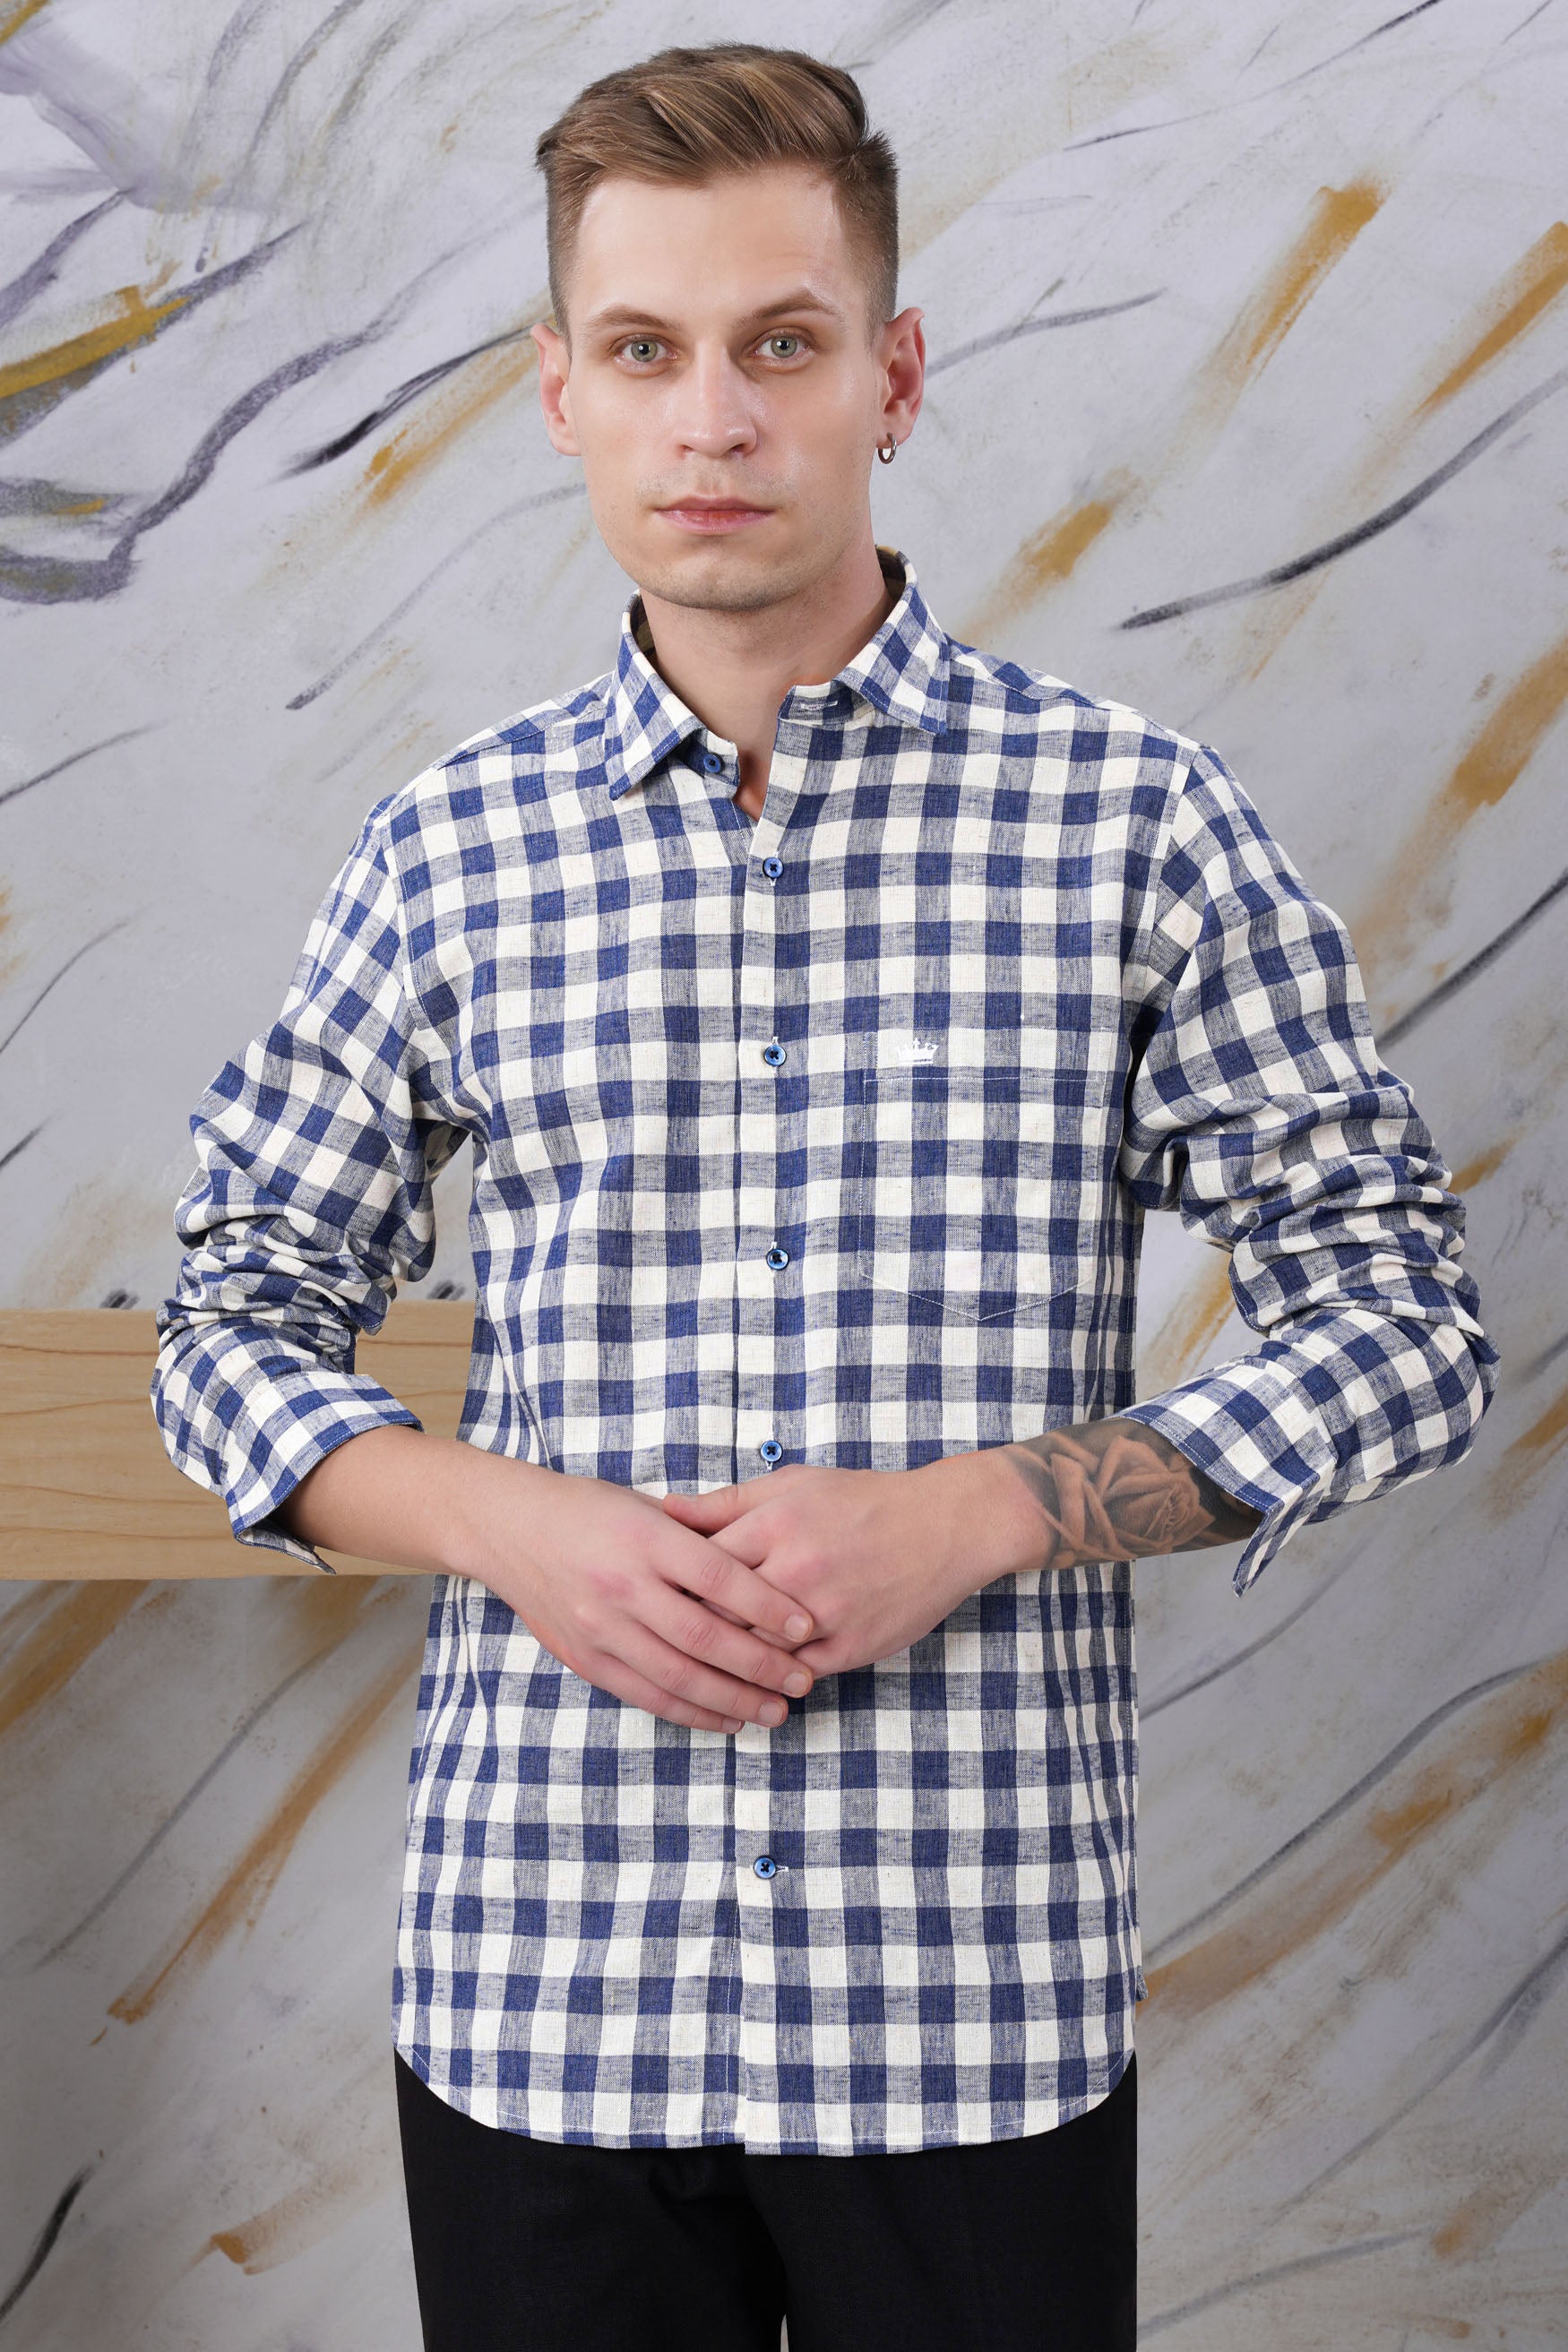 Bright White and Cadet Blue Plaid Luxurious Linen Shirt 11682-BLE-38, 11682-BLE-H-38, 11682-BLE-39, 11682-BLE-H-39, 11682-BLE-40, 11682-BLE-H-40, 11682-BLE-42, 11682-BLE-H-42, 11682-BLE-44, 11682-BLE-H-44, 11682-BLE-46, 11682-BLE-H-46, 11682-BLE-48, 11682-BLE-H-48, 11682-BLE-50, 11682-BLE-H-50, 11682-BLE-52, 11682-BLE-H-52